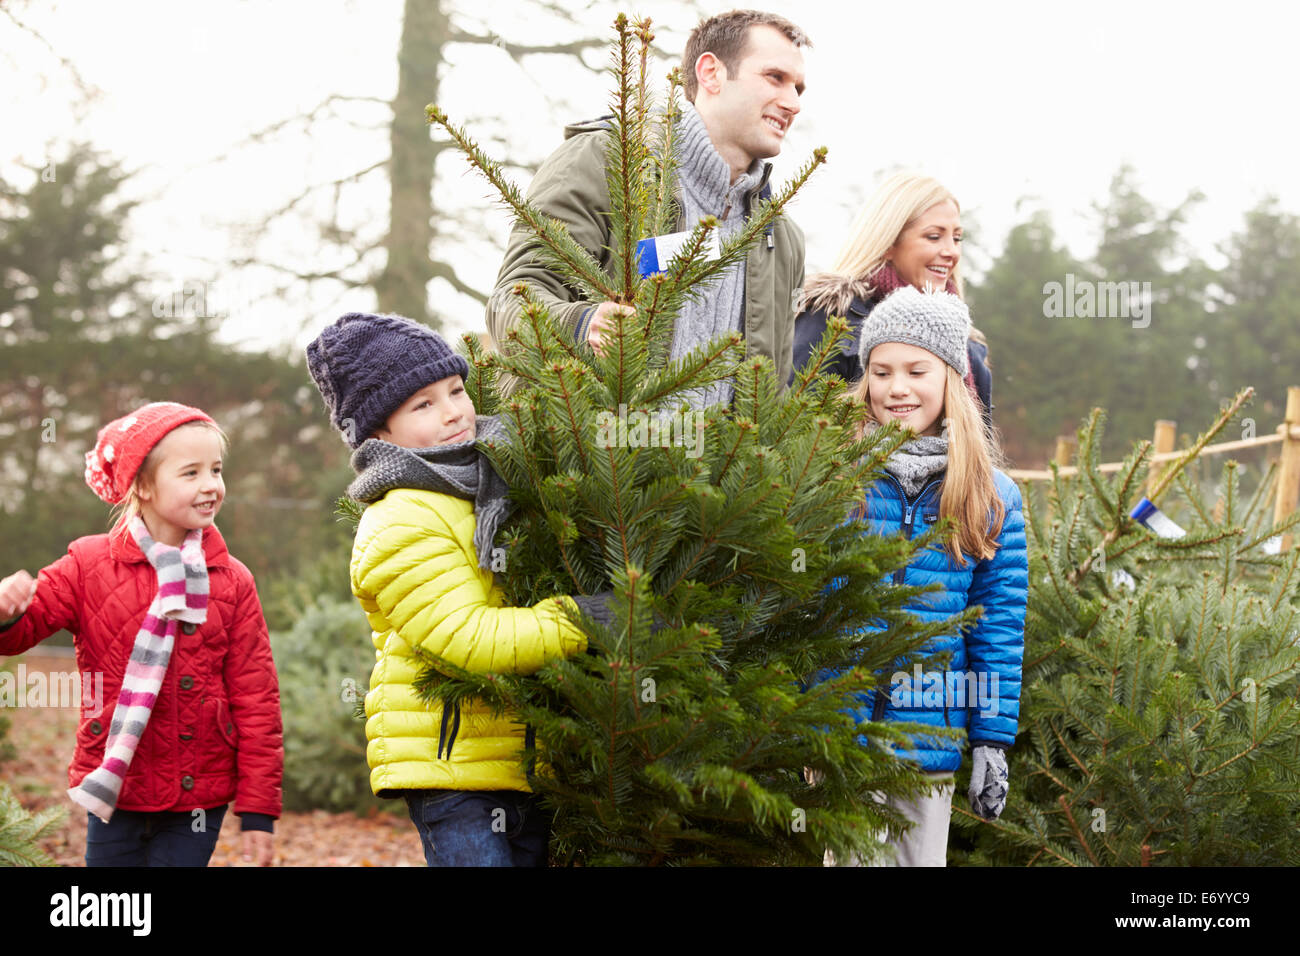 Outdoor Family Choosing Christmas Tree Together Stock Photo - Alamy